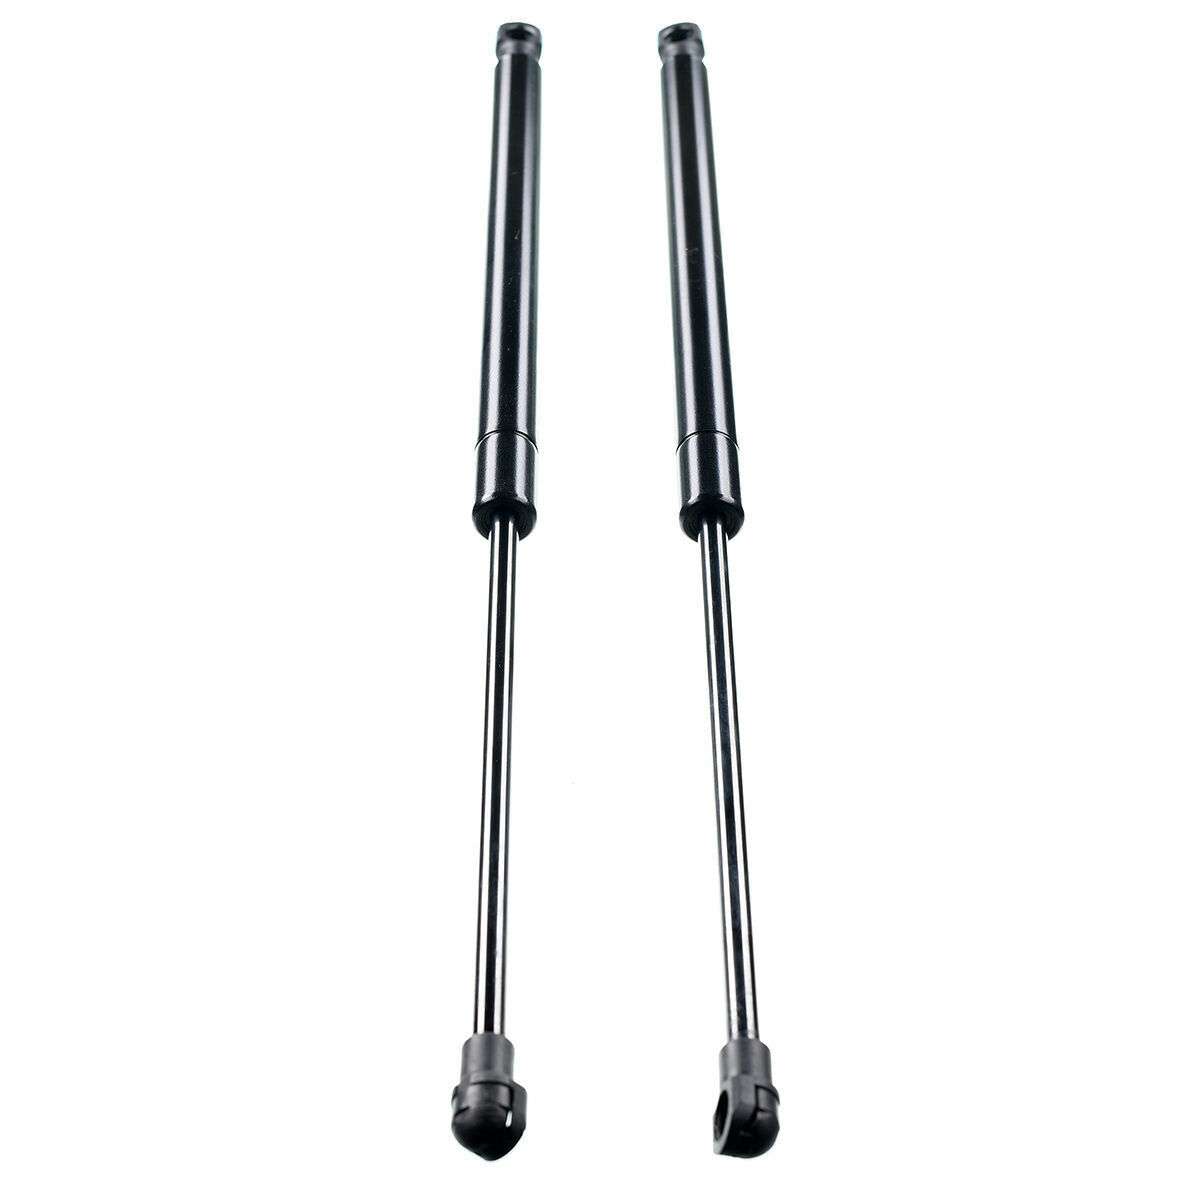 For Lexus IS350 2006-2013 IS250 IS300 Front Hood Lift Support struts X 2